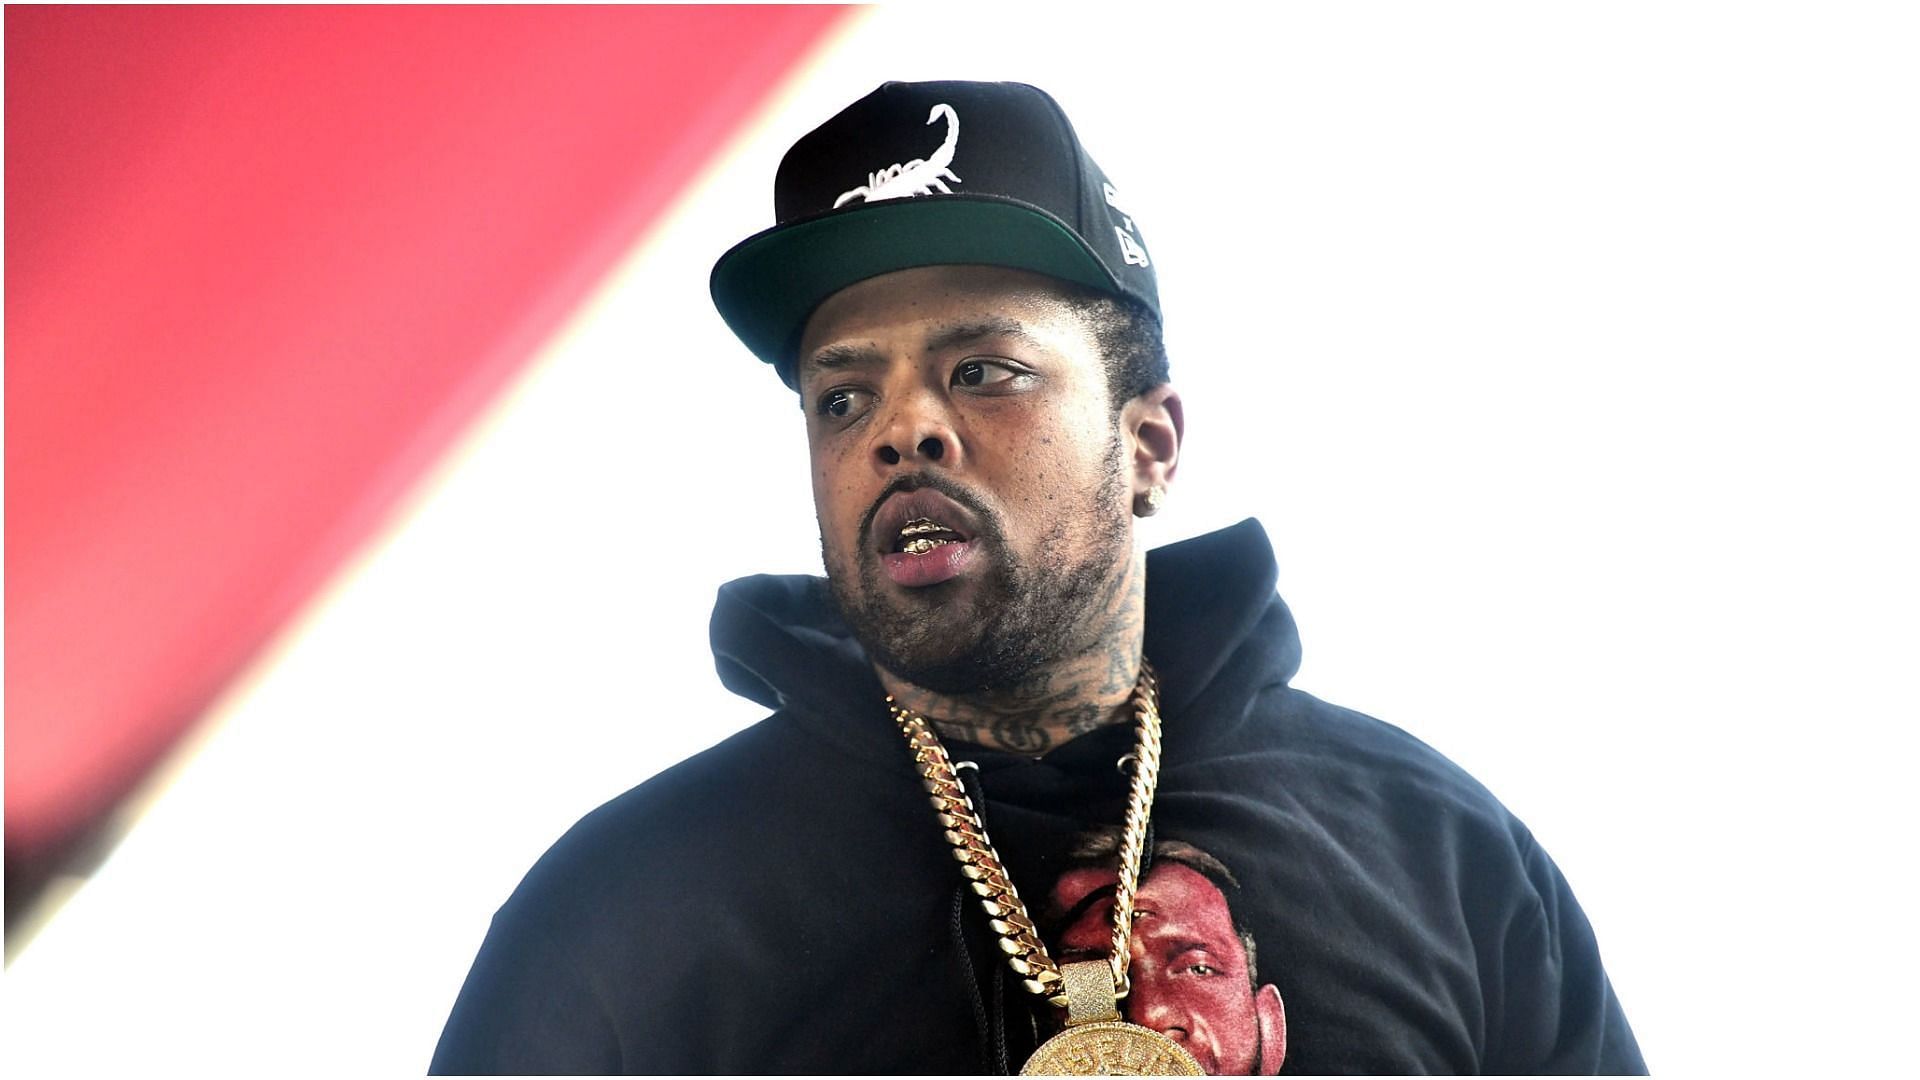 Details of Westside Gunn&#039;s health condition are yet to be revealed (Image by Scott Dudelson via Getty Images)